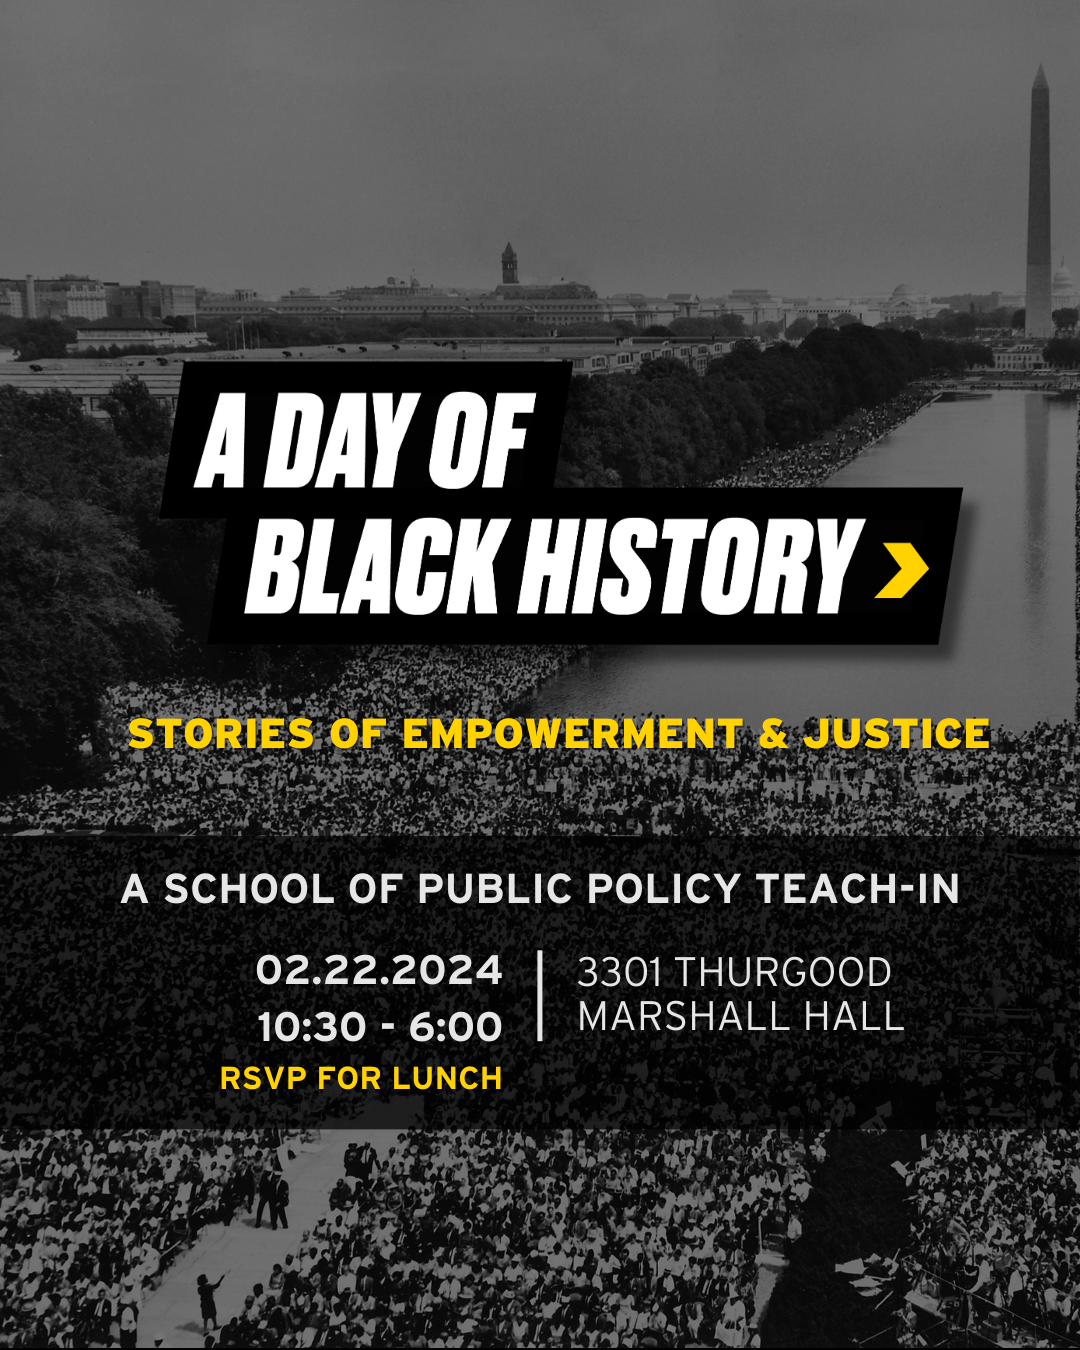 Black History Teach In in School of Public Policy on 02222024